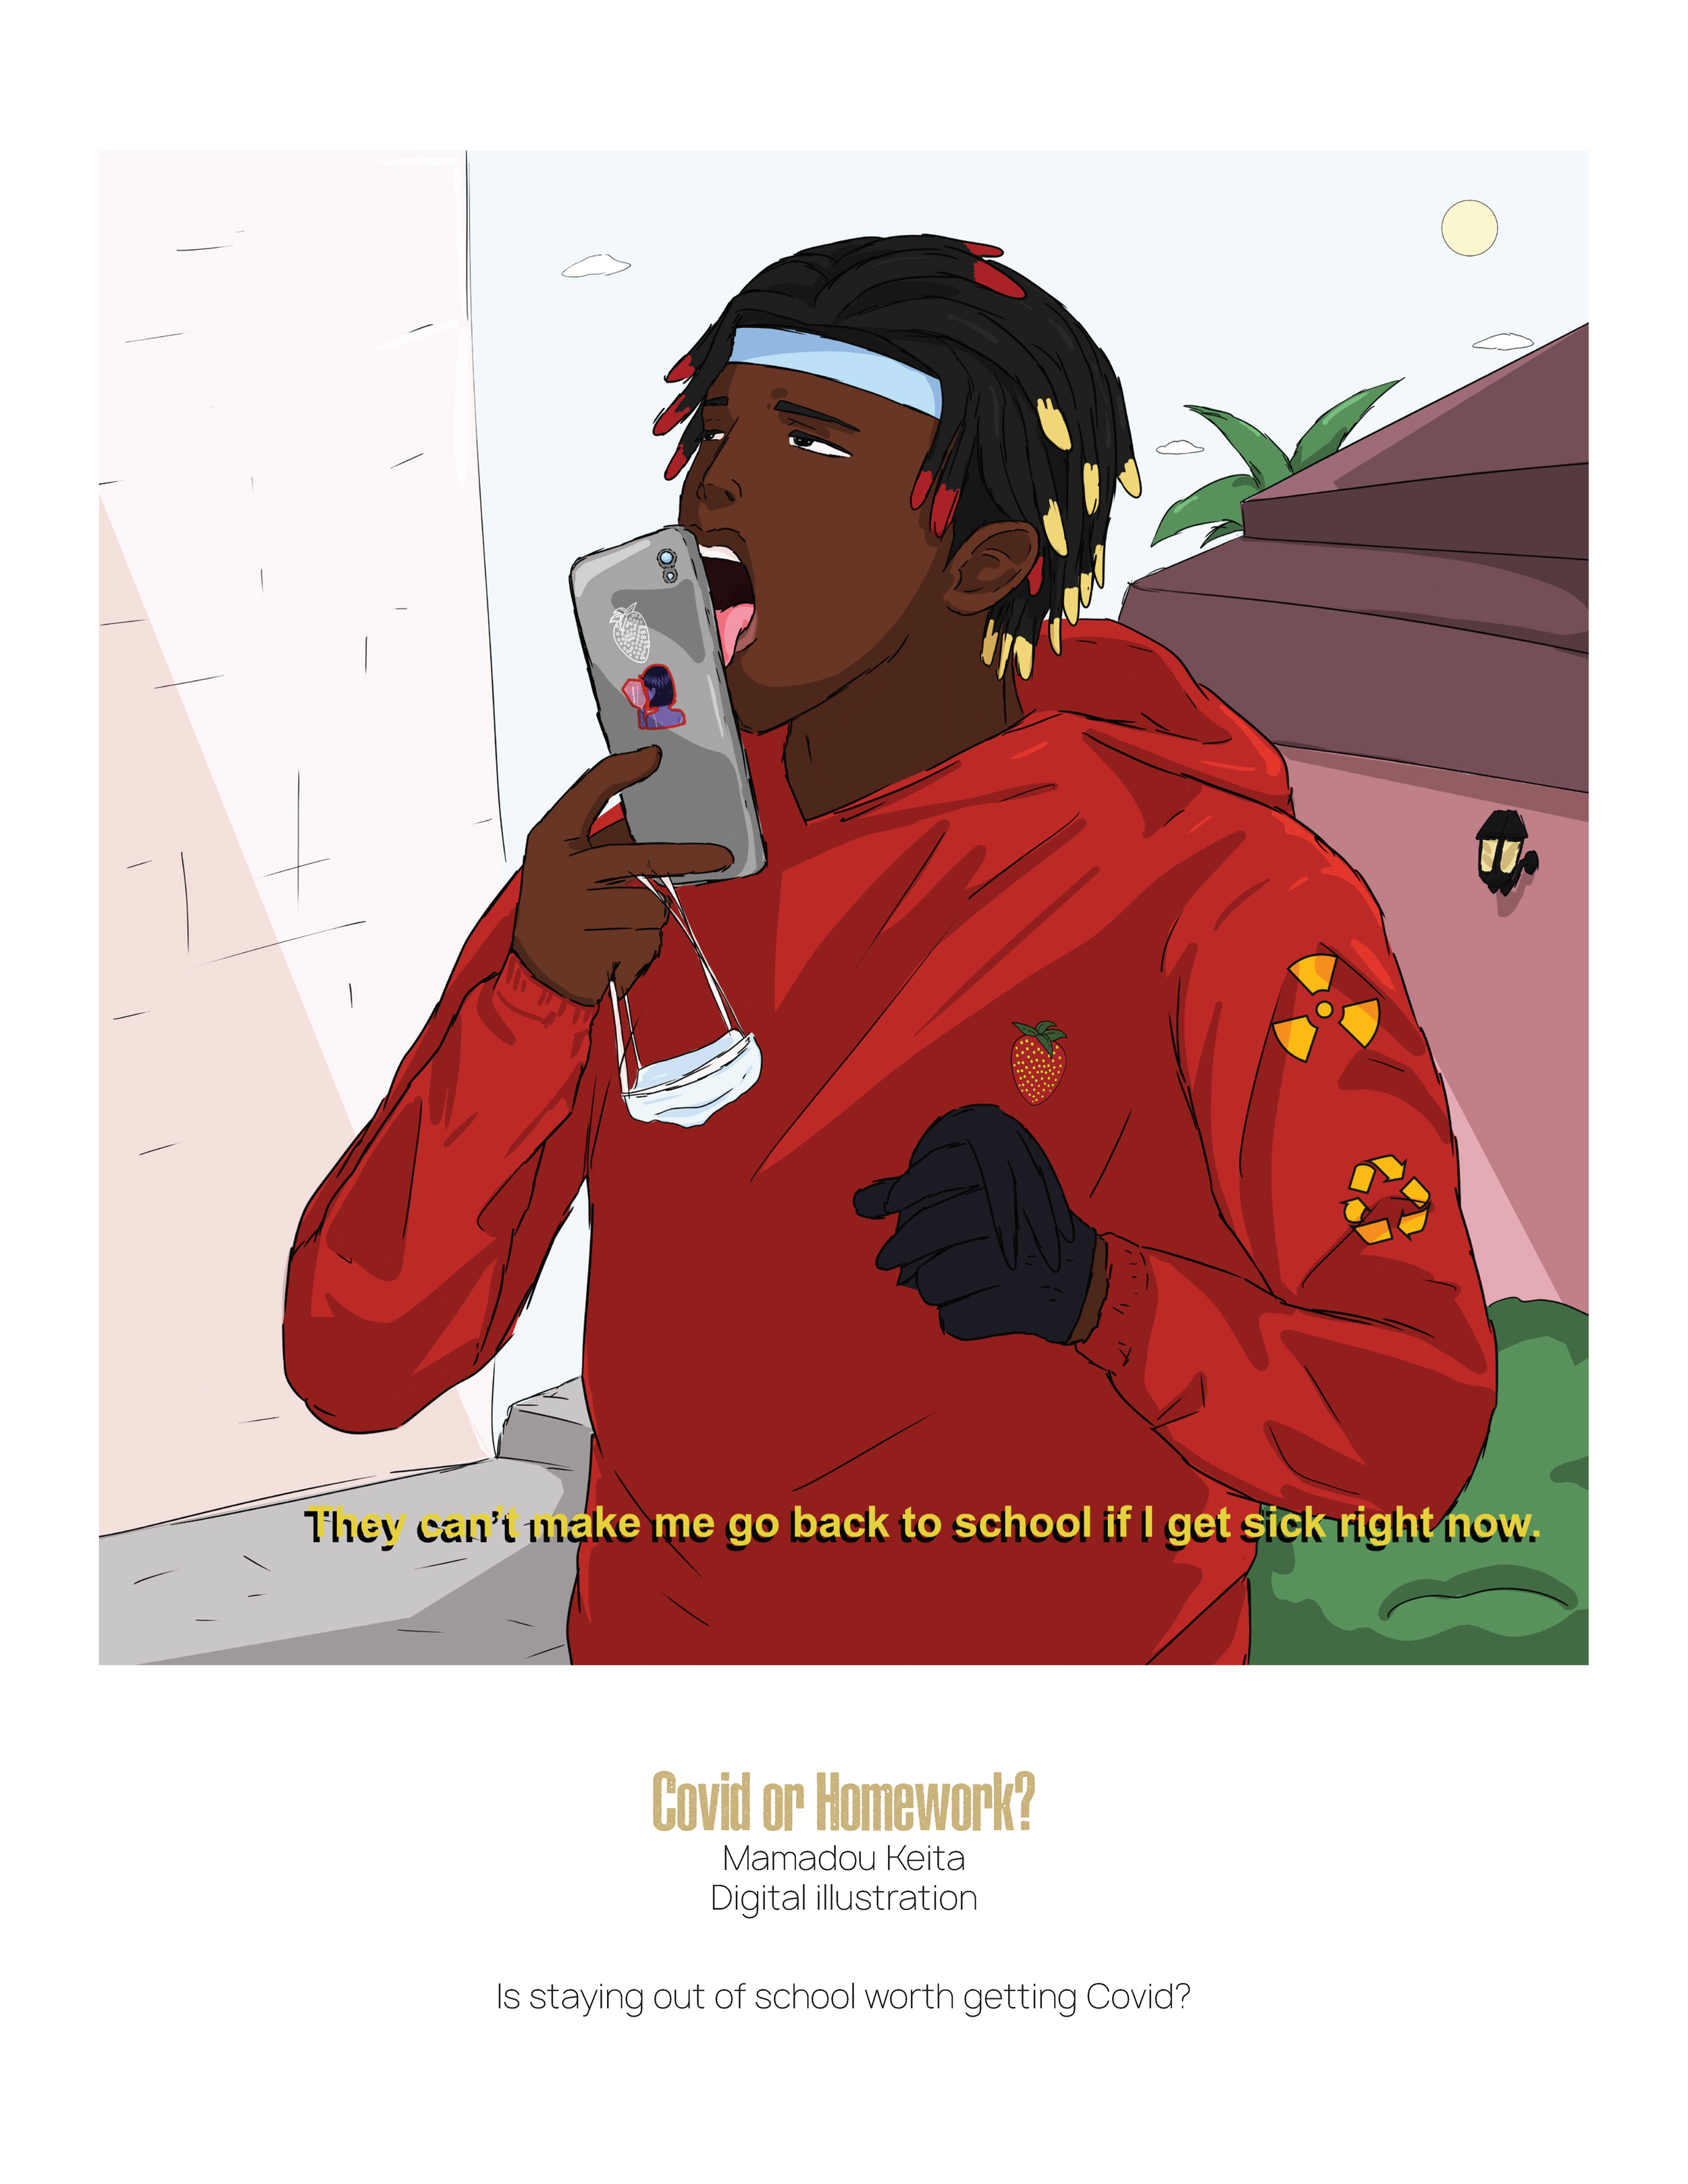 Covid or Homework? by Mamadou Keita, Digital Illustration of person licking phone